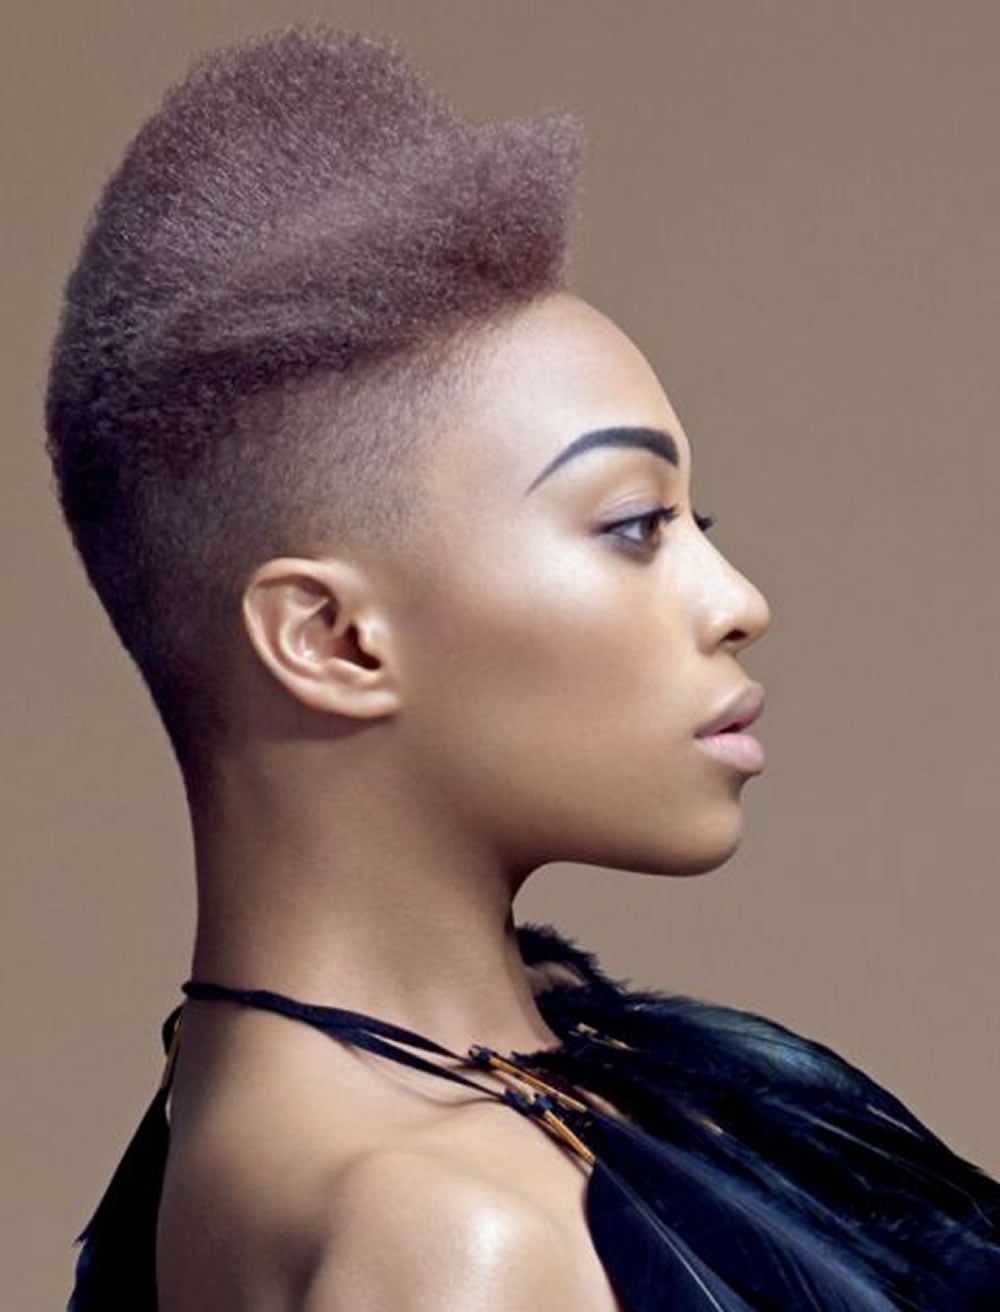 26 Coolest Pixie Haircuts For Black Women In 2020 – Page 2 – Hairstyles In 2017 Dark And Sultry Pixie Haircuts (View 4 of 20)